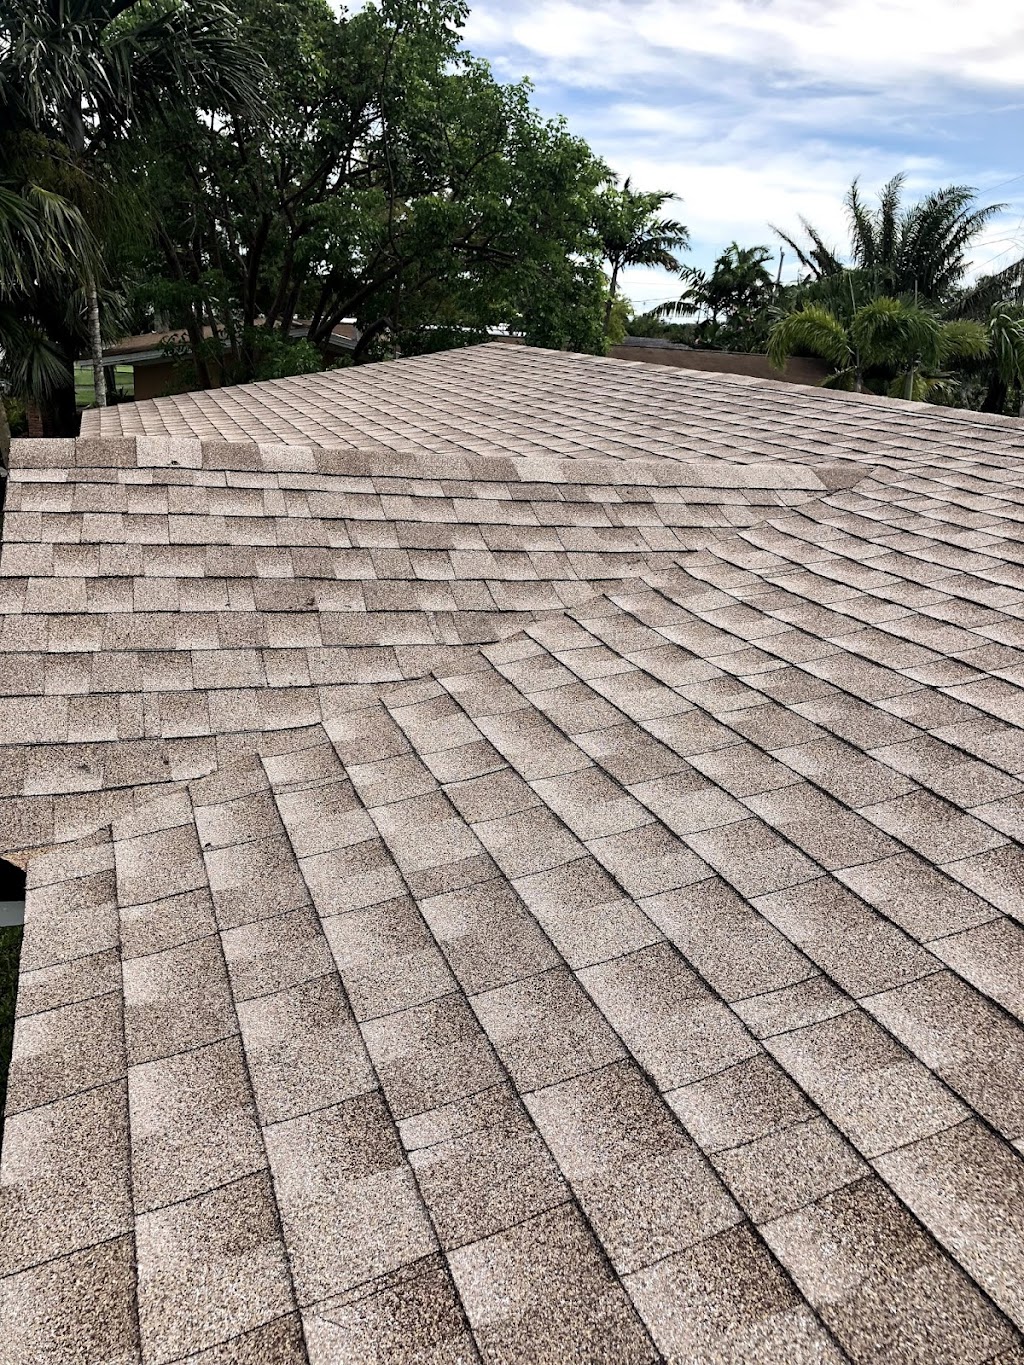 Stone House Roofing | 28124 SW 159th Pl, Homestead, FL 33033, USA | Phone: (305) 239-8838